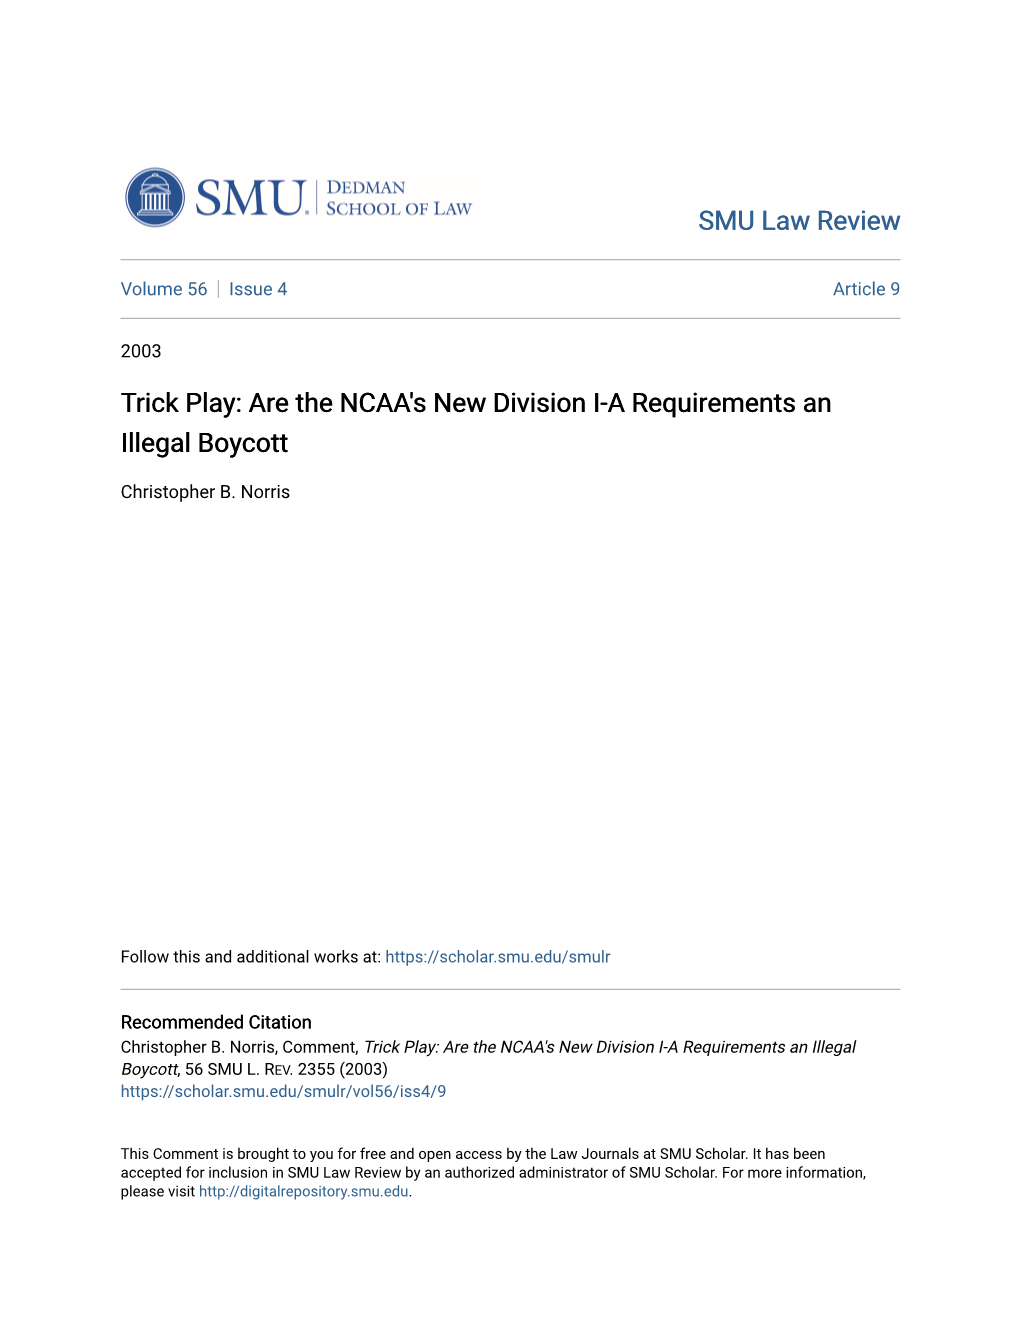 Are the NCAA's New Division IA Requirements an Illegal Boycott